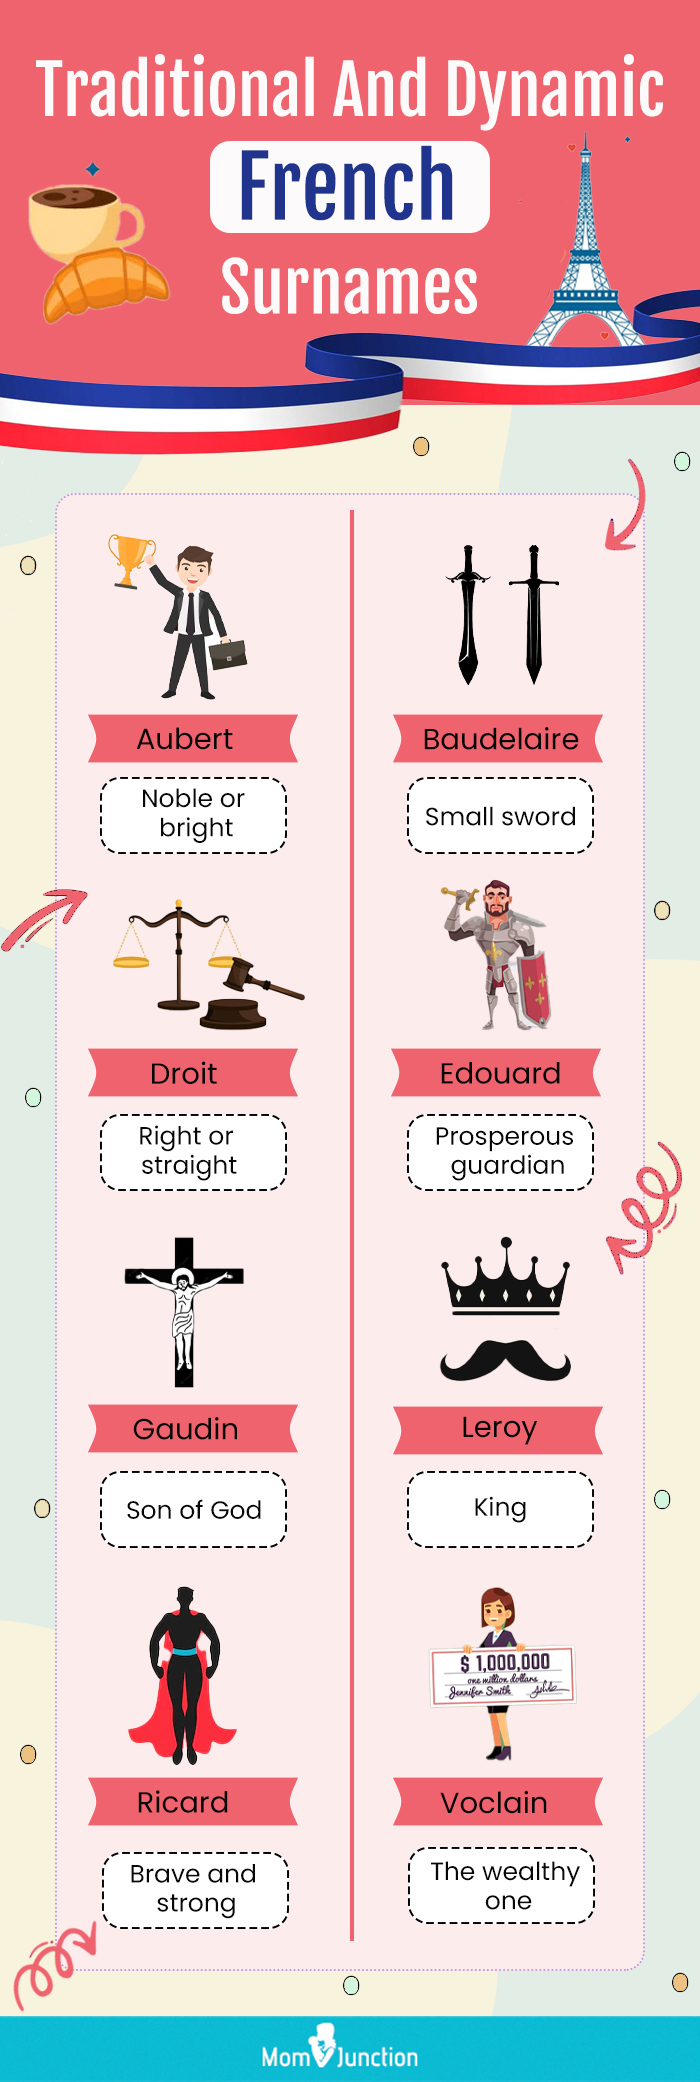 french surnames (infographic)